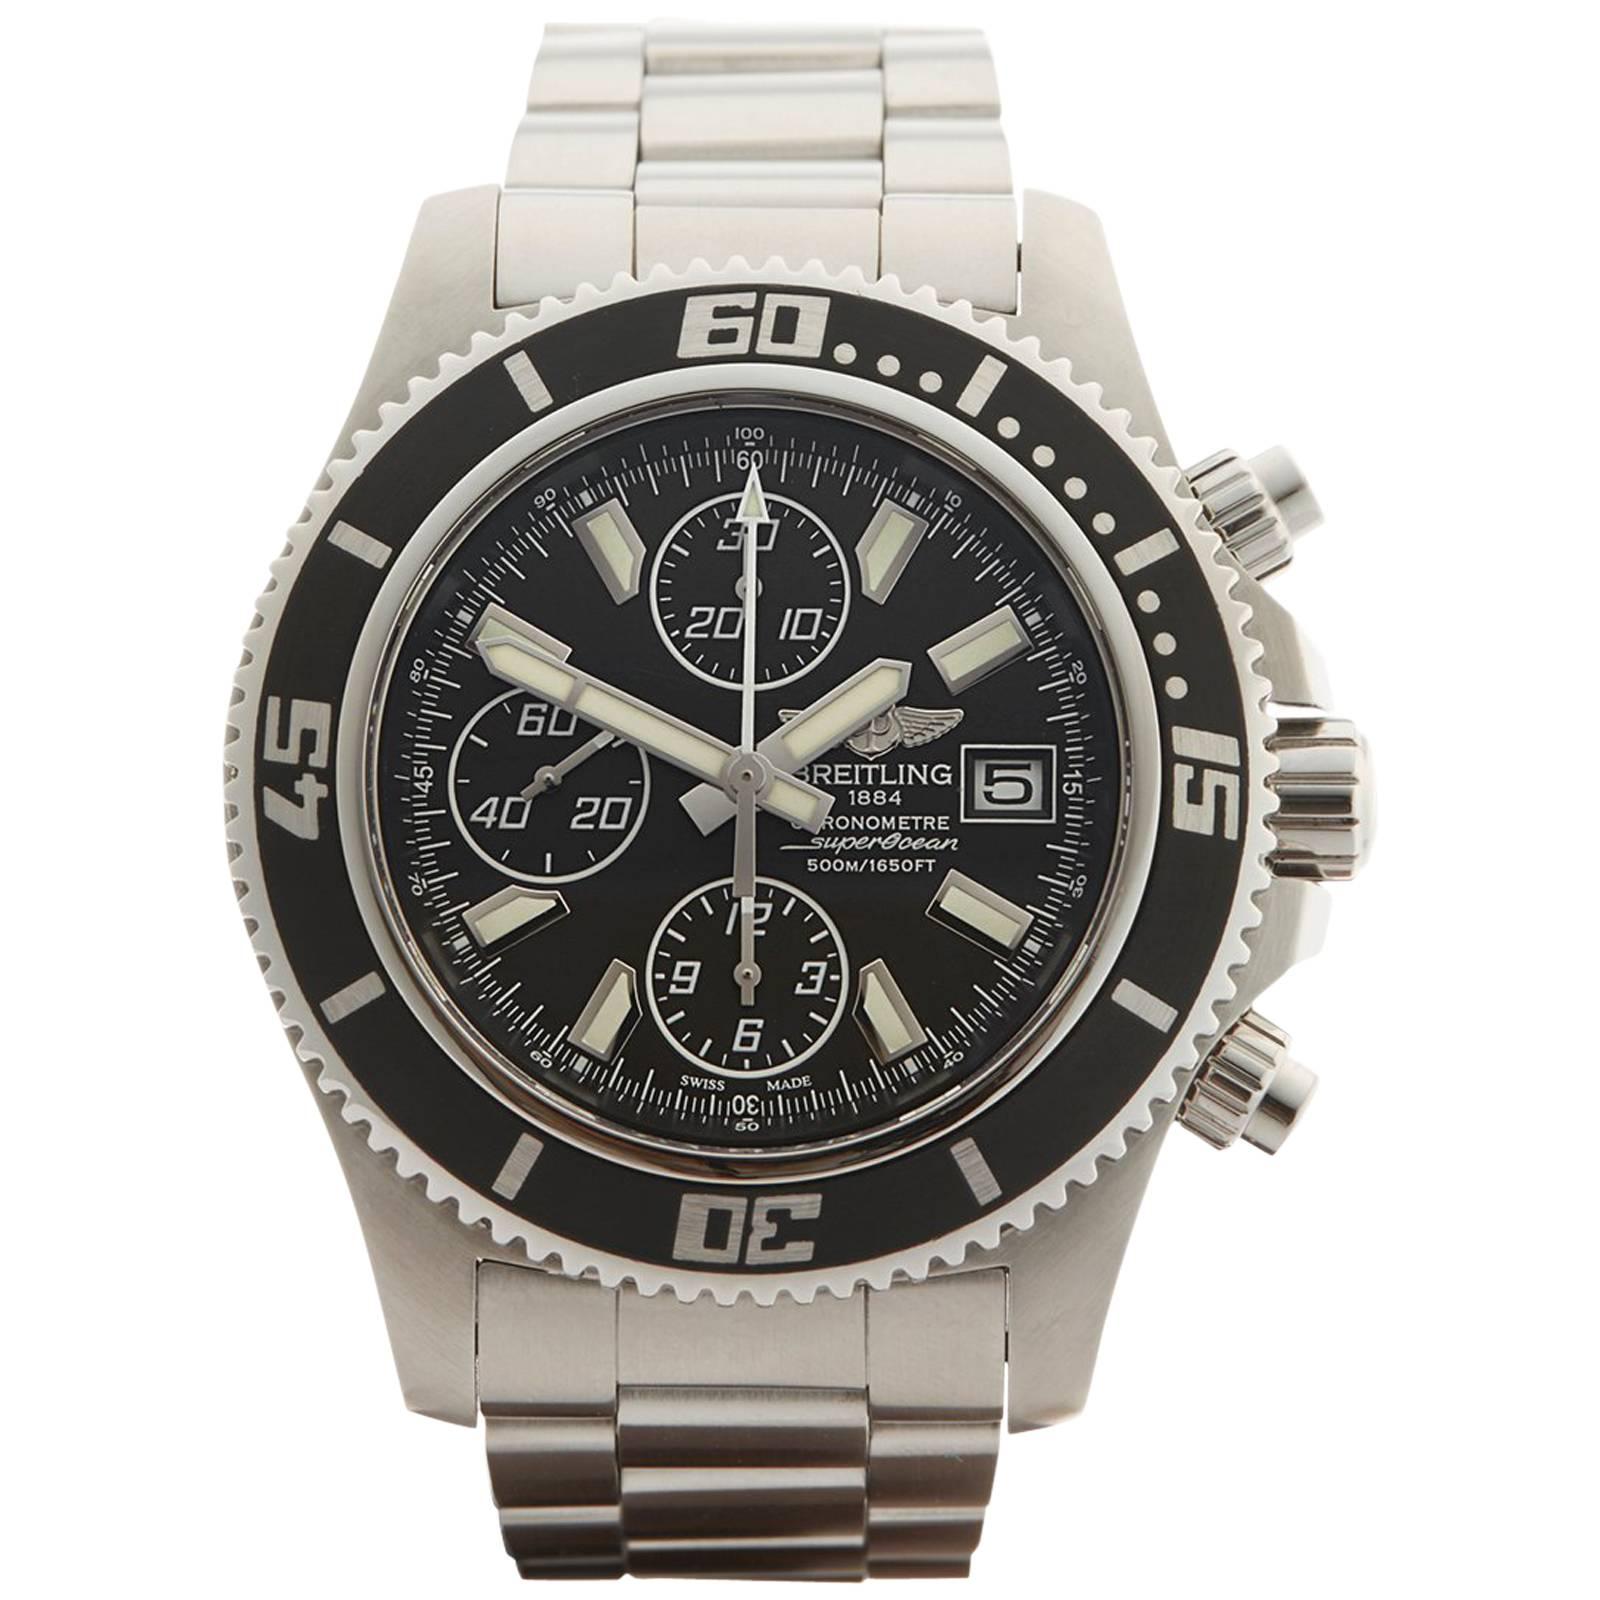 Breitling Superocean II Chronograph Stainless Steel Gents A1334102, 2014